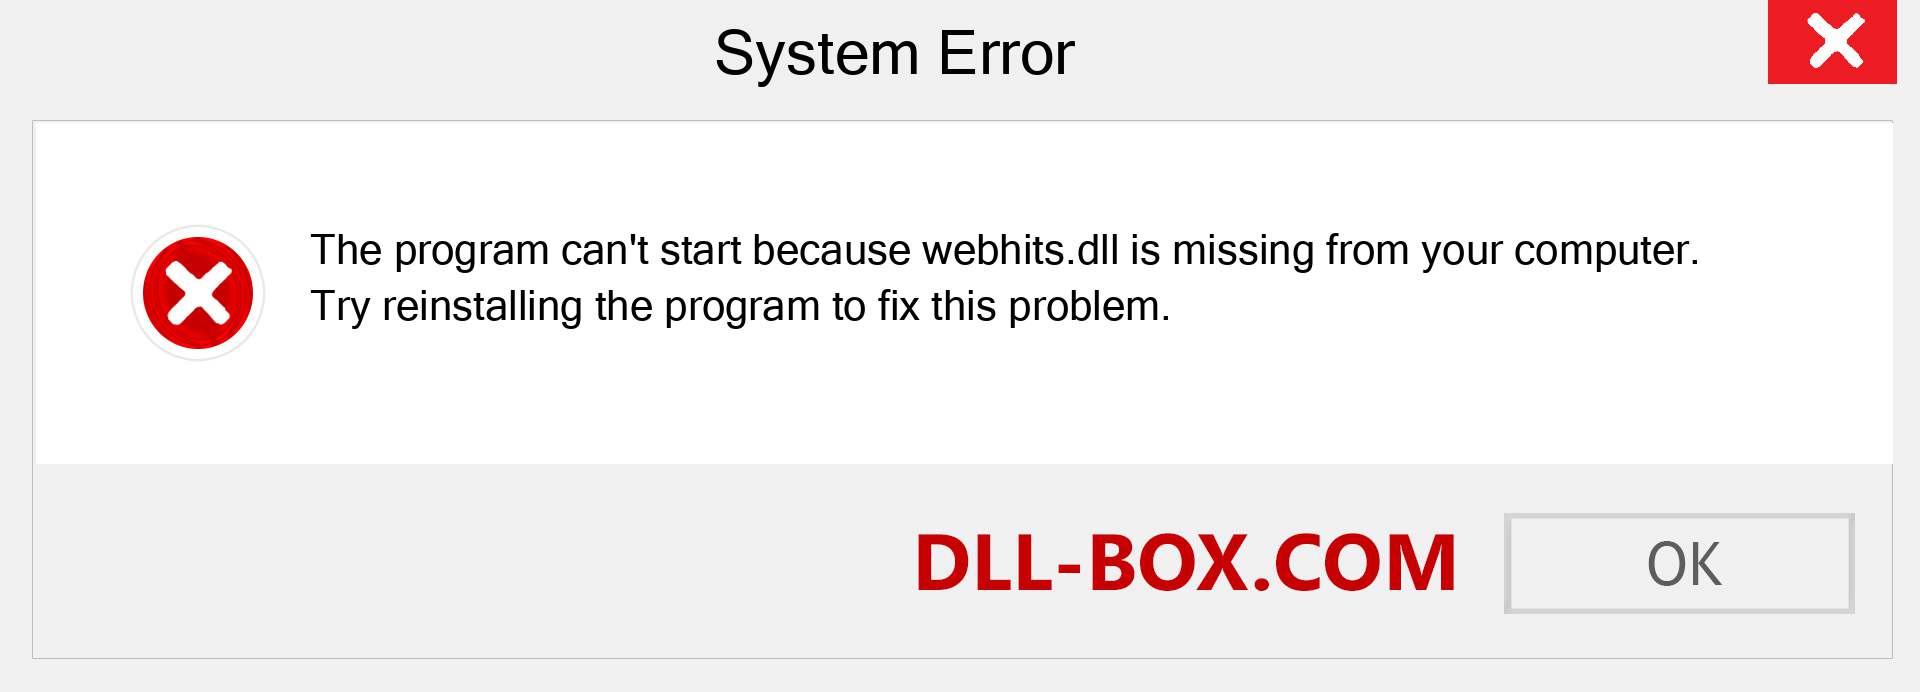  webhits.dll file is missing?. Download for Windows 7, 8, 10 - Fix  webhits dll Missing Error on Windows, photos, images